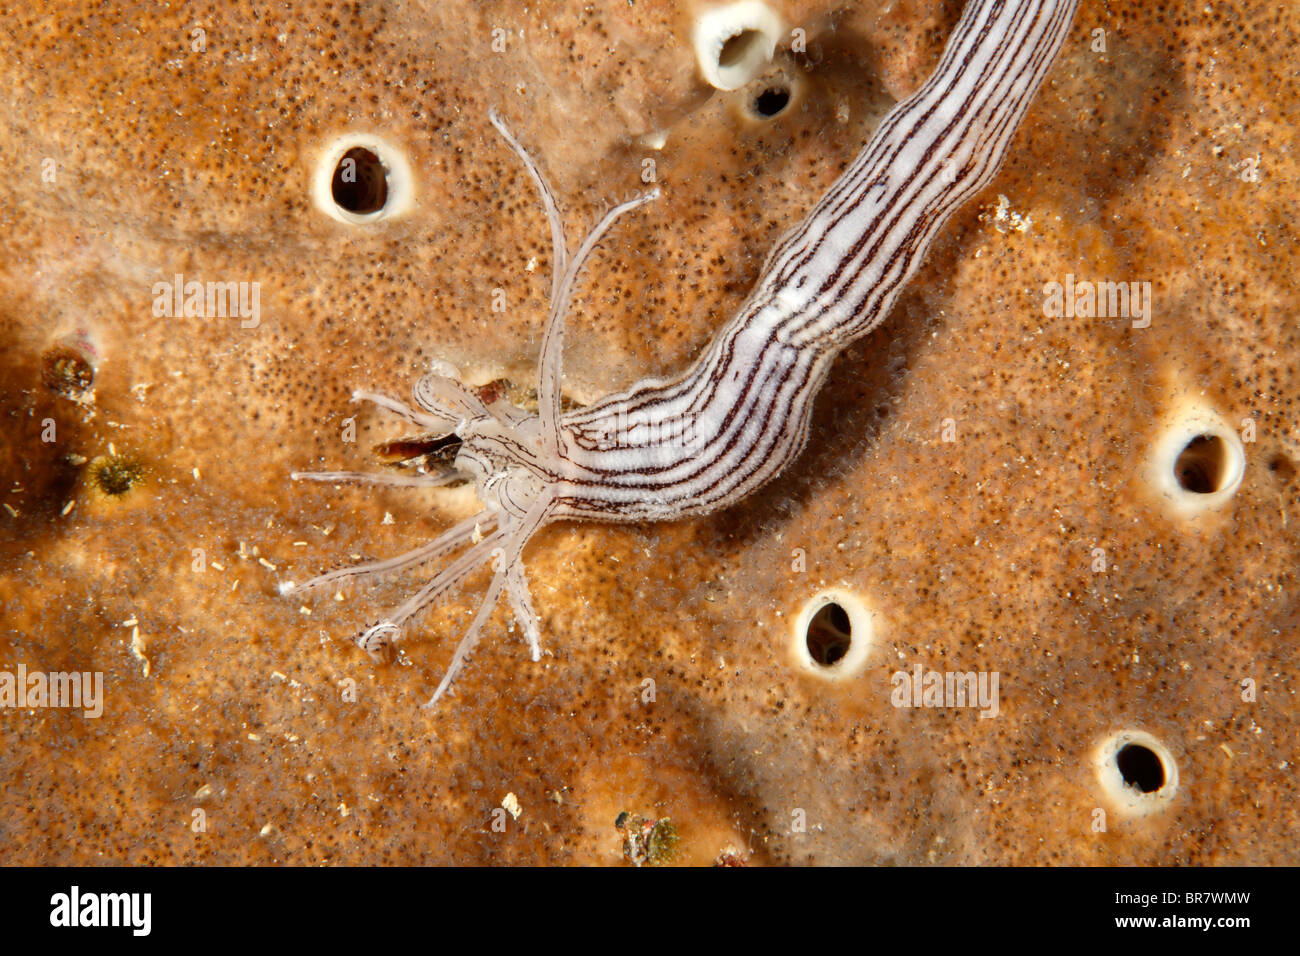 Sea cucumber, Synaptula lamperti,  Showing the feeding tentacles Stock Photo